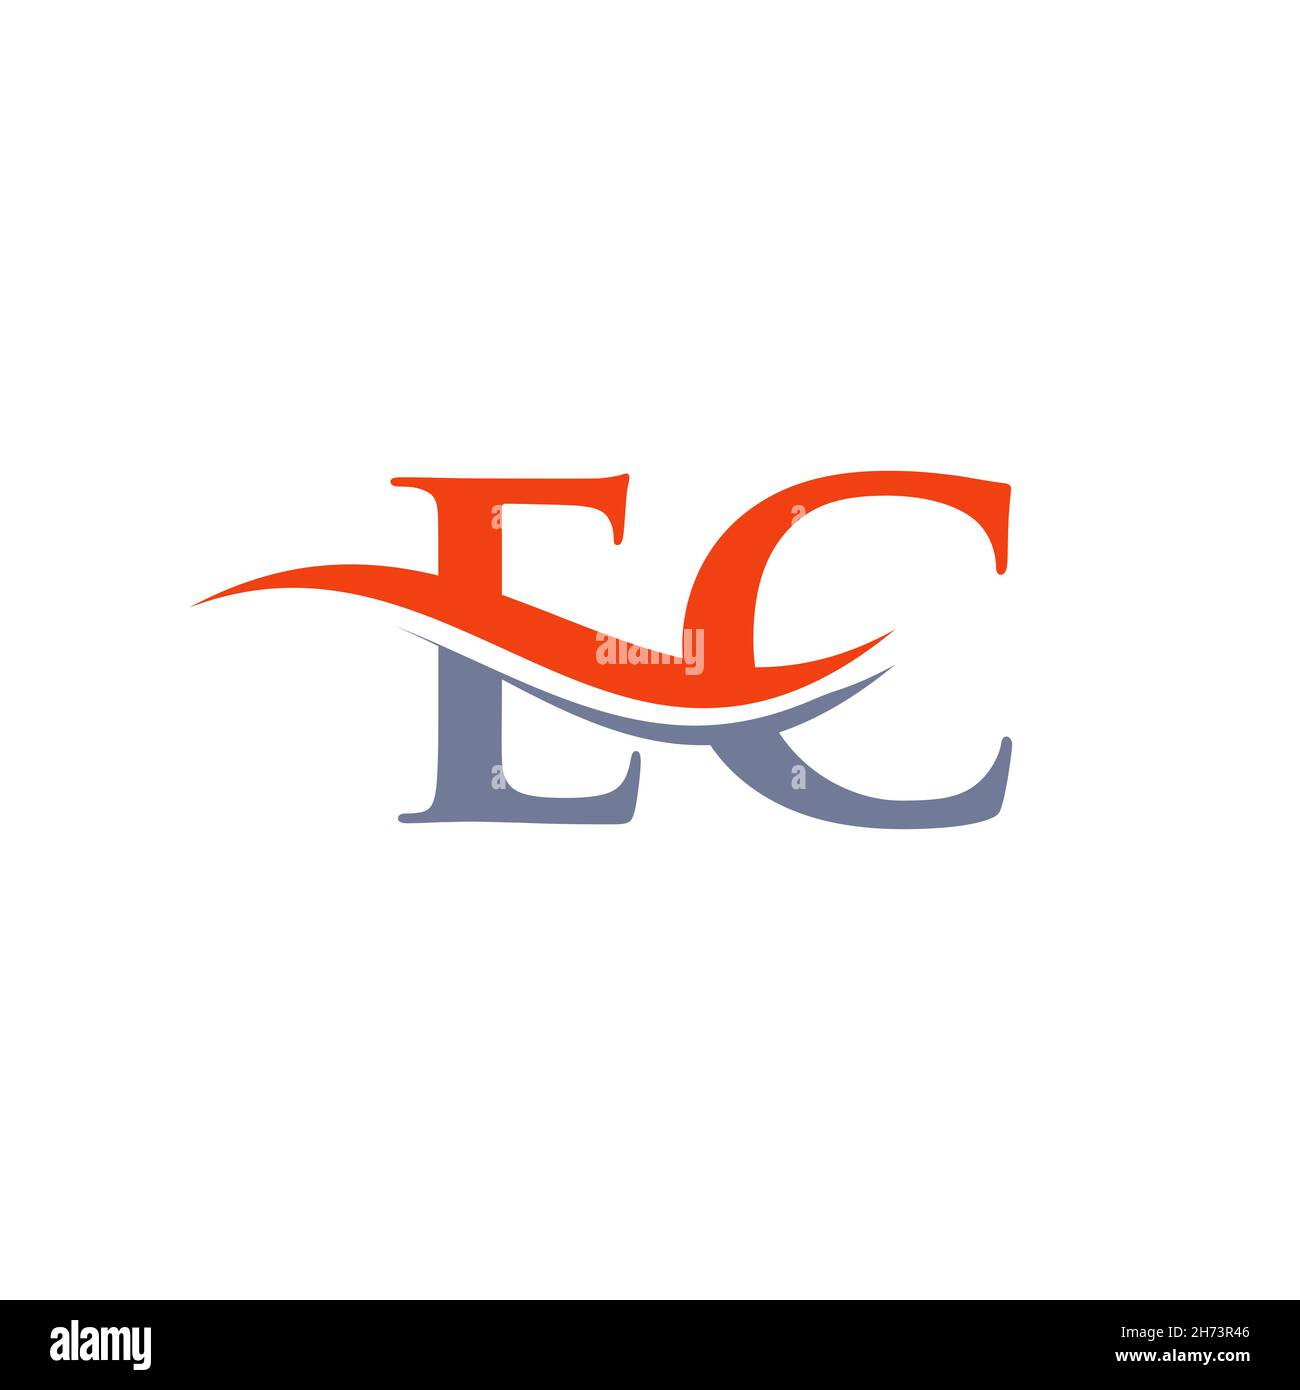 EC Linked Logo for business and company identity. Creative Letter EC Logo Vector Stock Vector